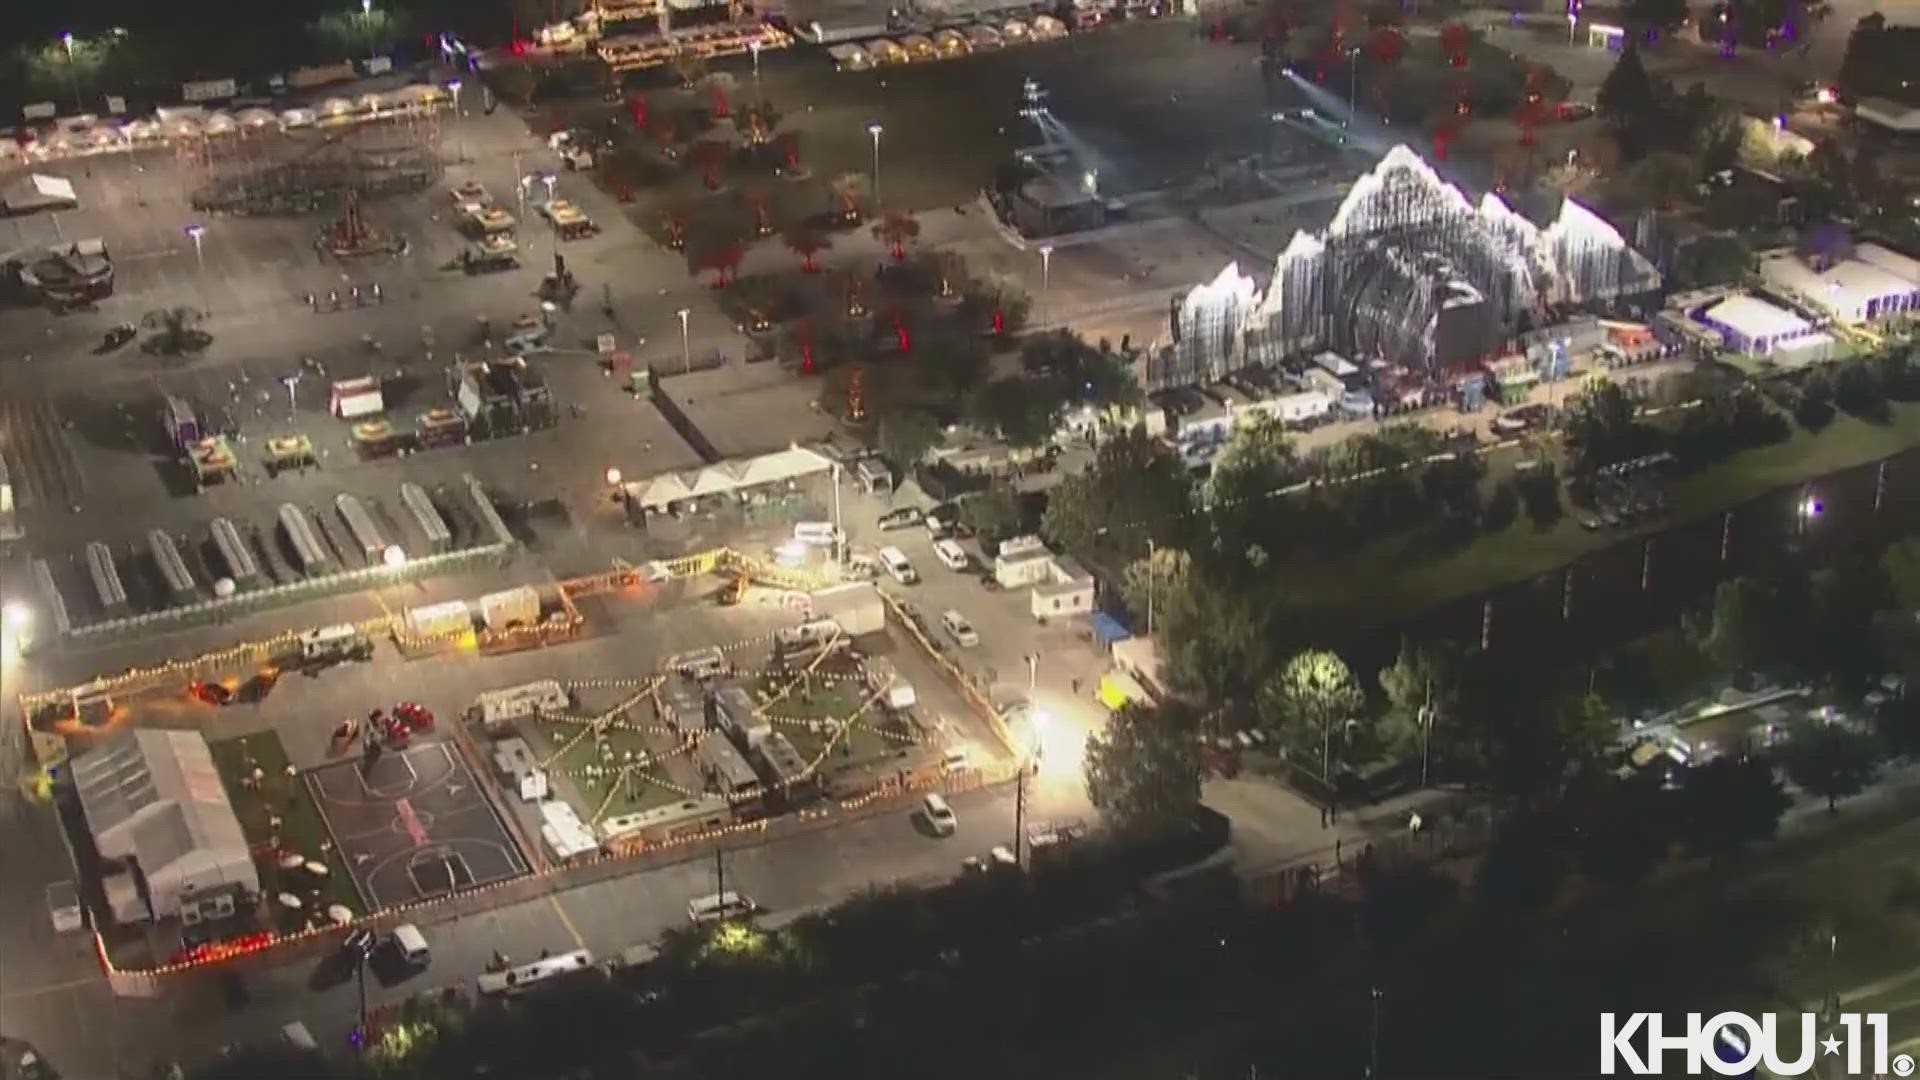 Houston firefighters said multiple people were injured at Travis Scott's Astroworld Festival Friday. This is raw video from Air 11 after the festival was over.